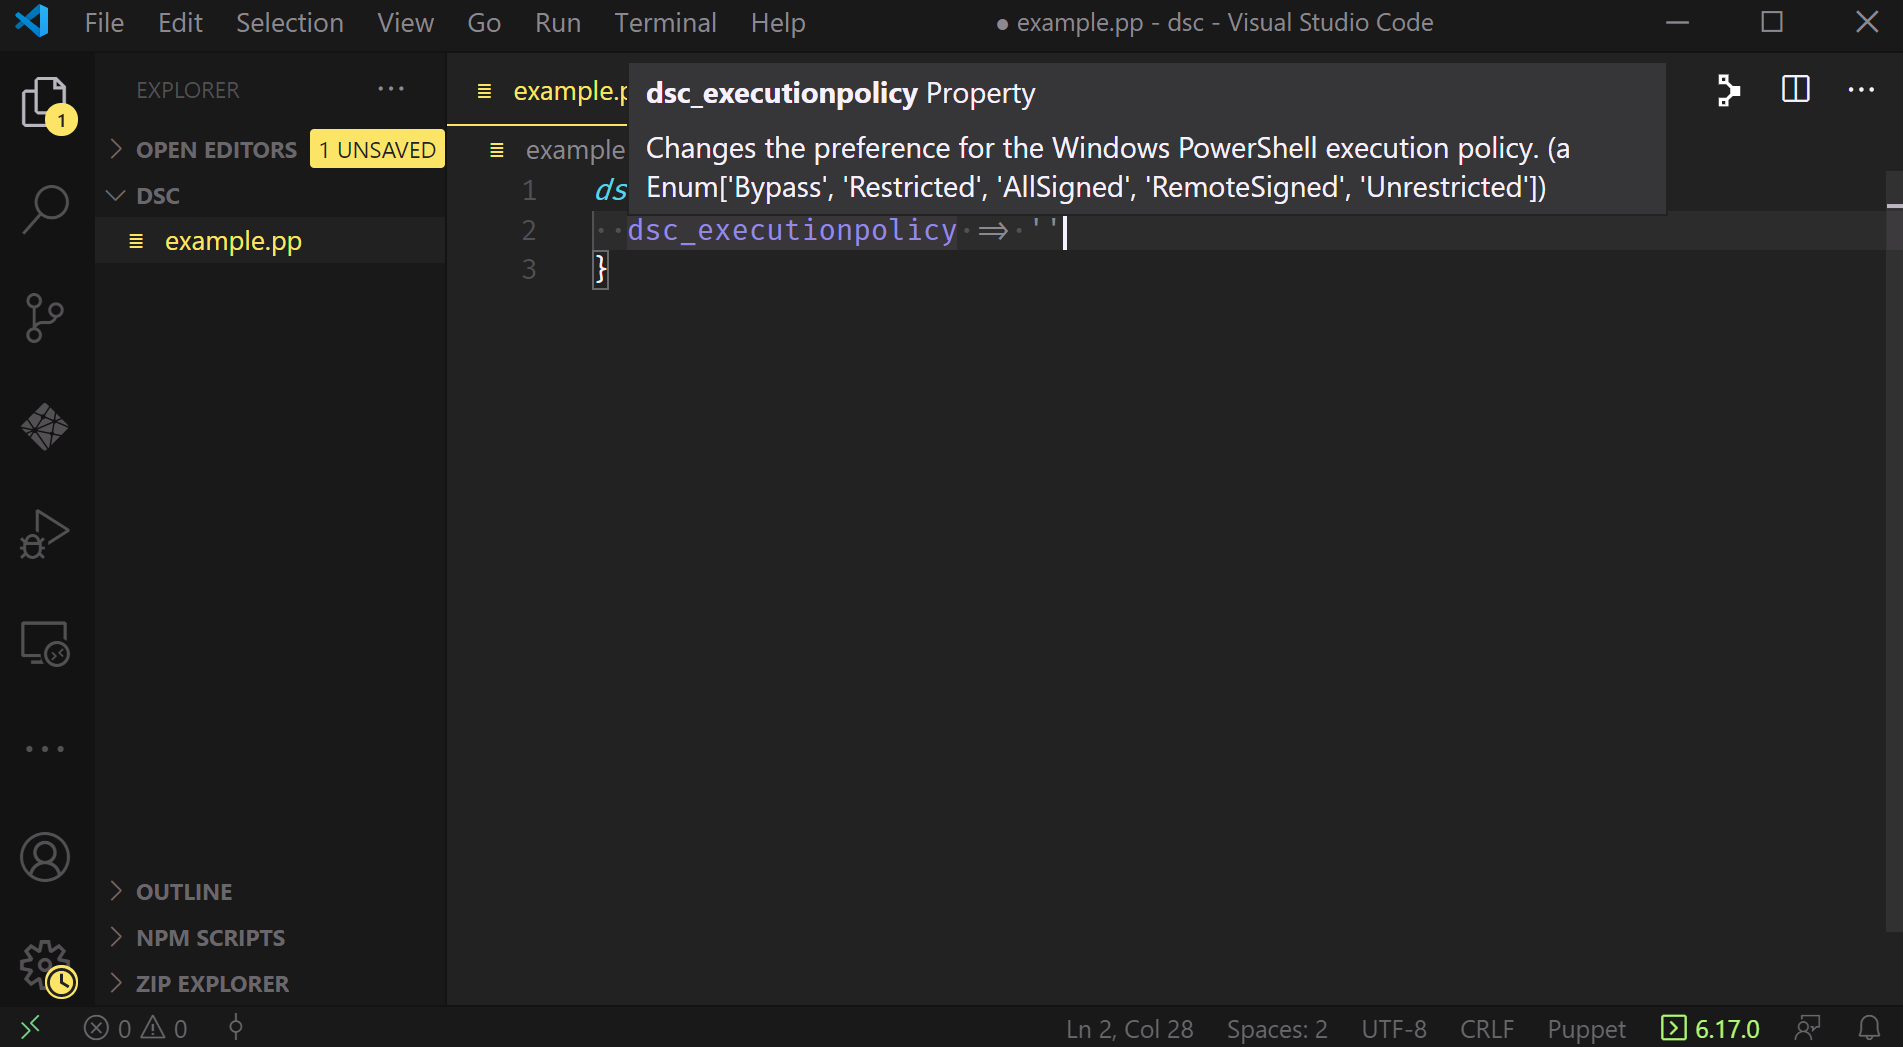 A VSCode window showing an empty declaration for ‘dsc_executionpolicy’ with the mouse hovering over that key, displaying a tooltip which includes the documentation and valid values for the property.